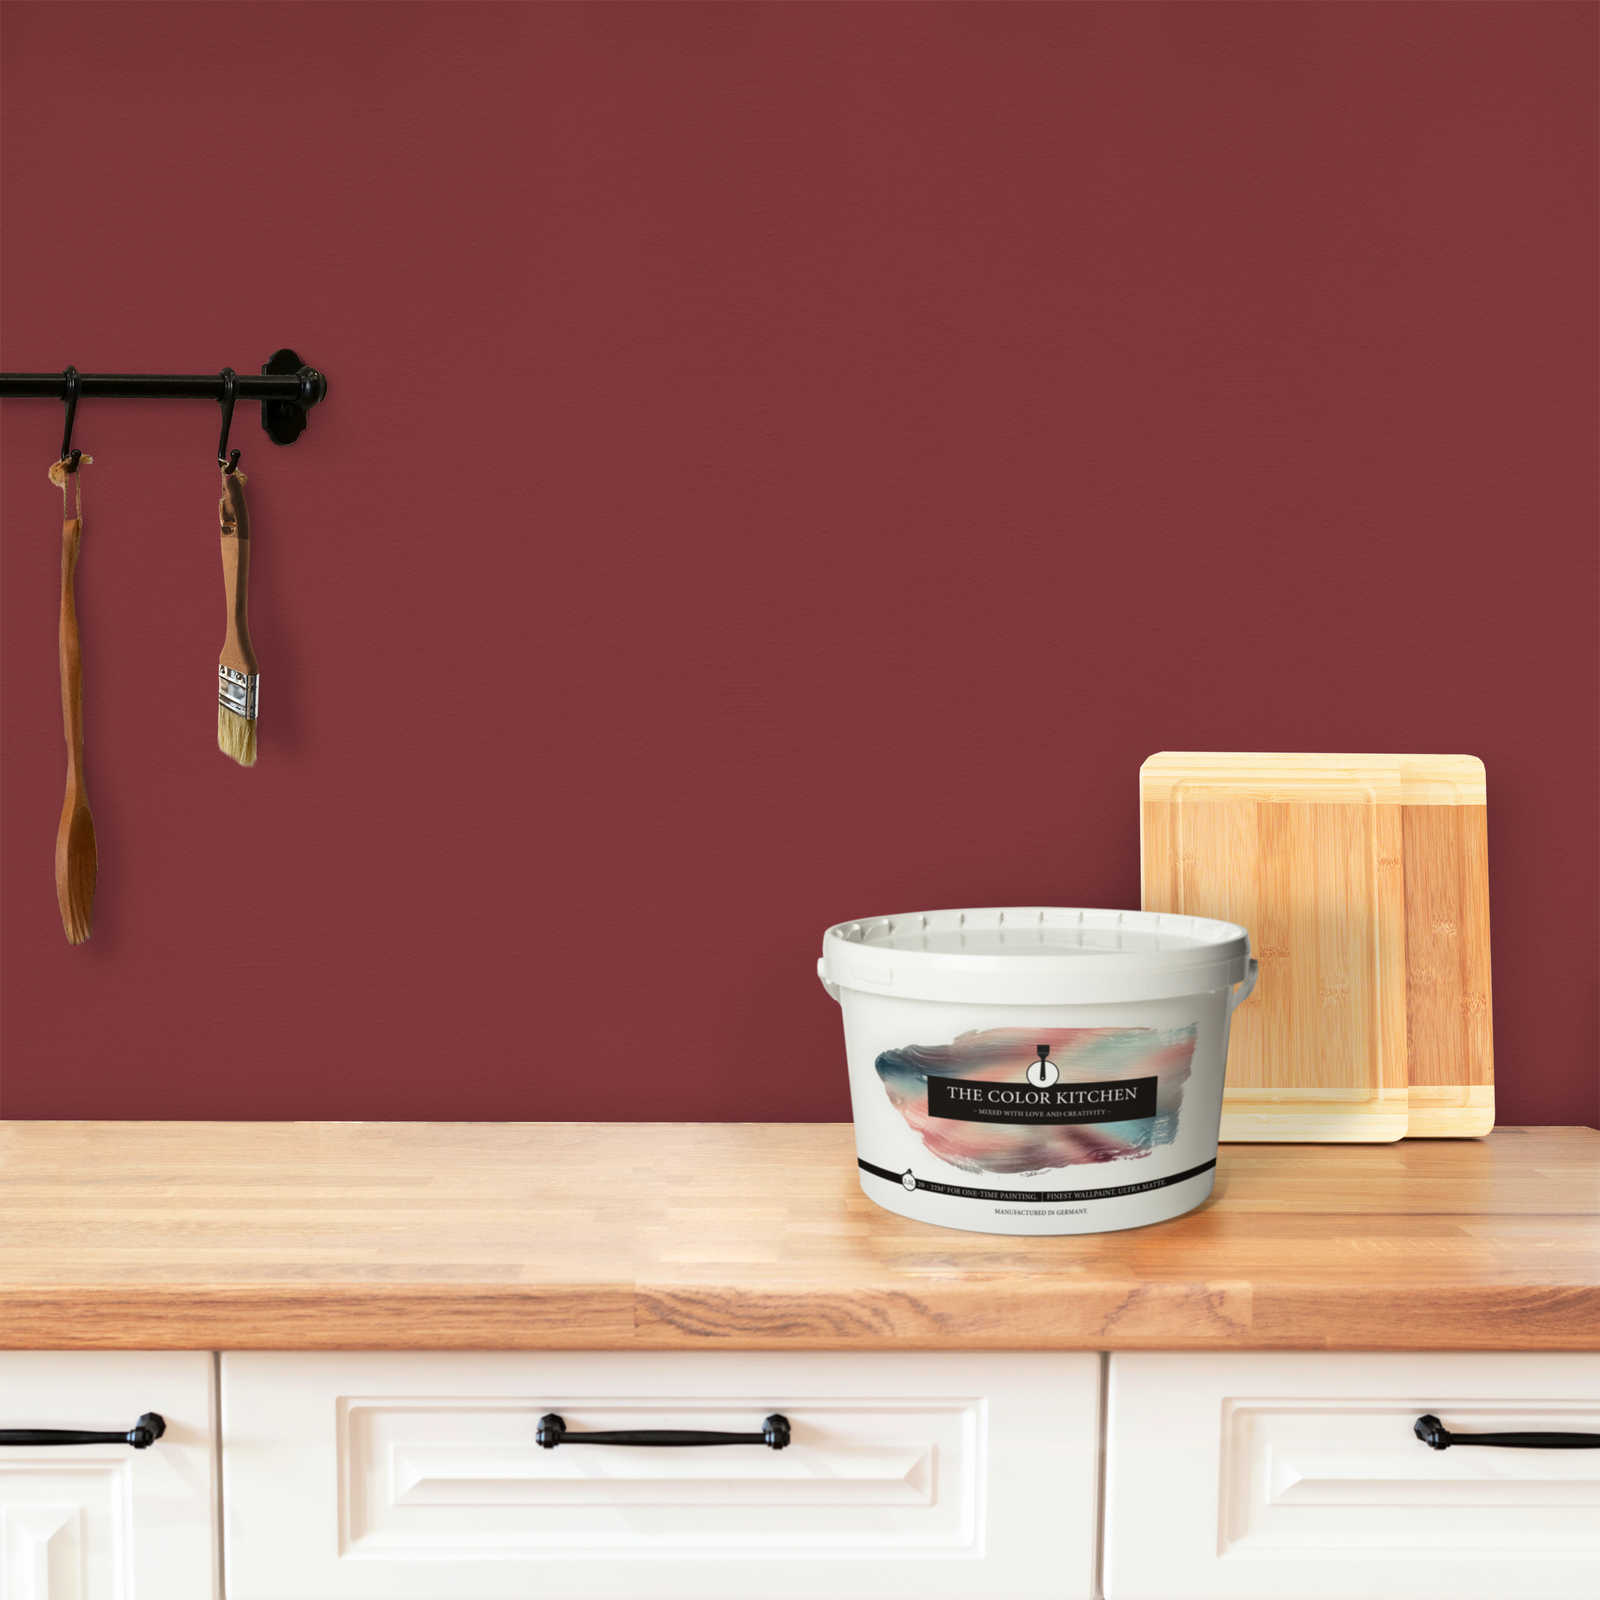             Wall Paint TCK7006 »Perky Pomegranate« in passionate dark red – 2.5 litre
        